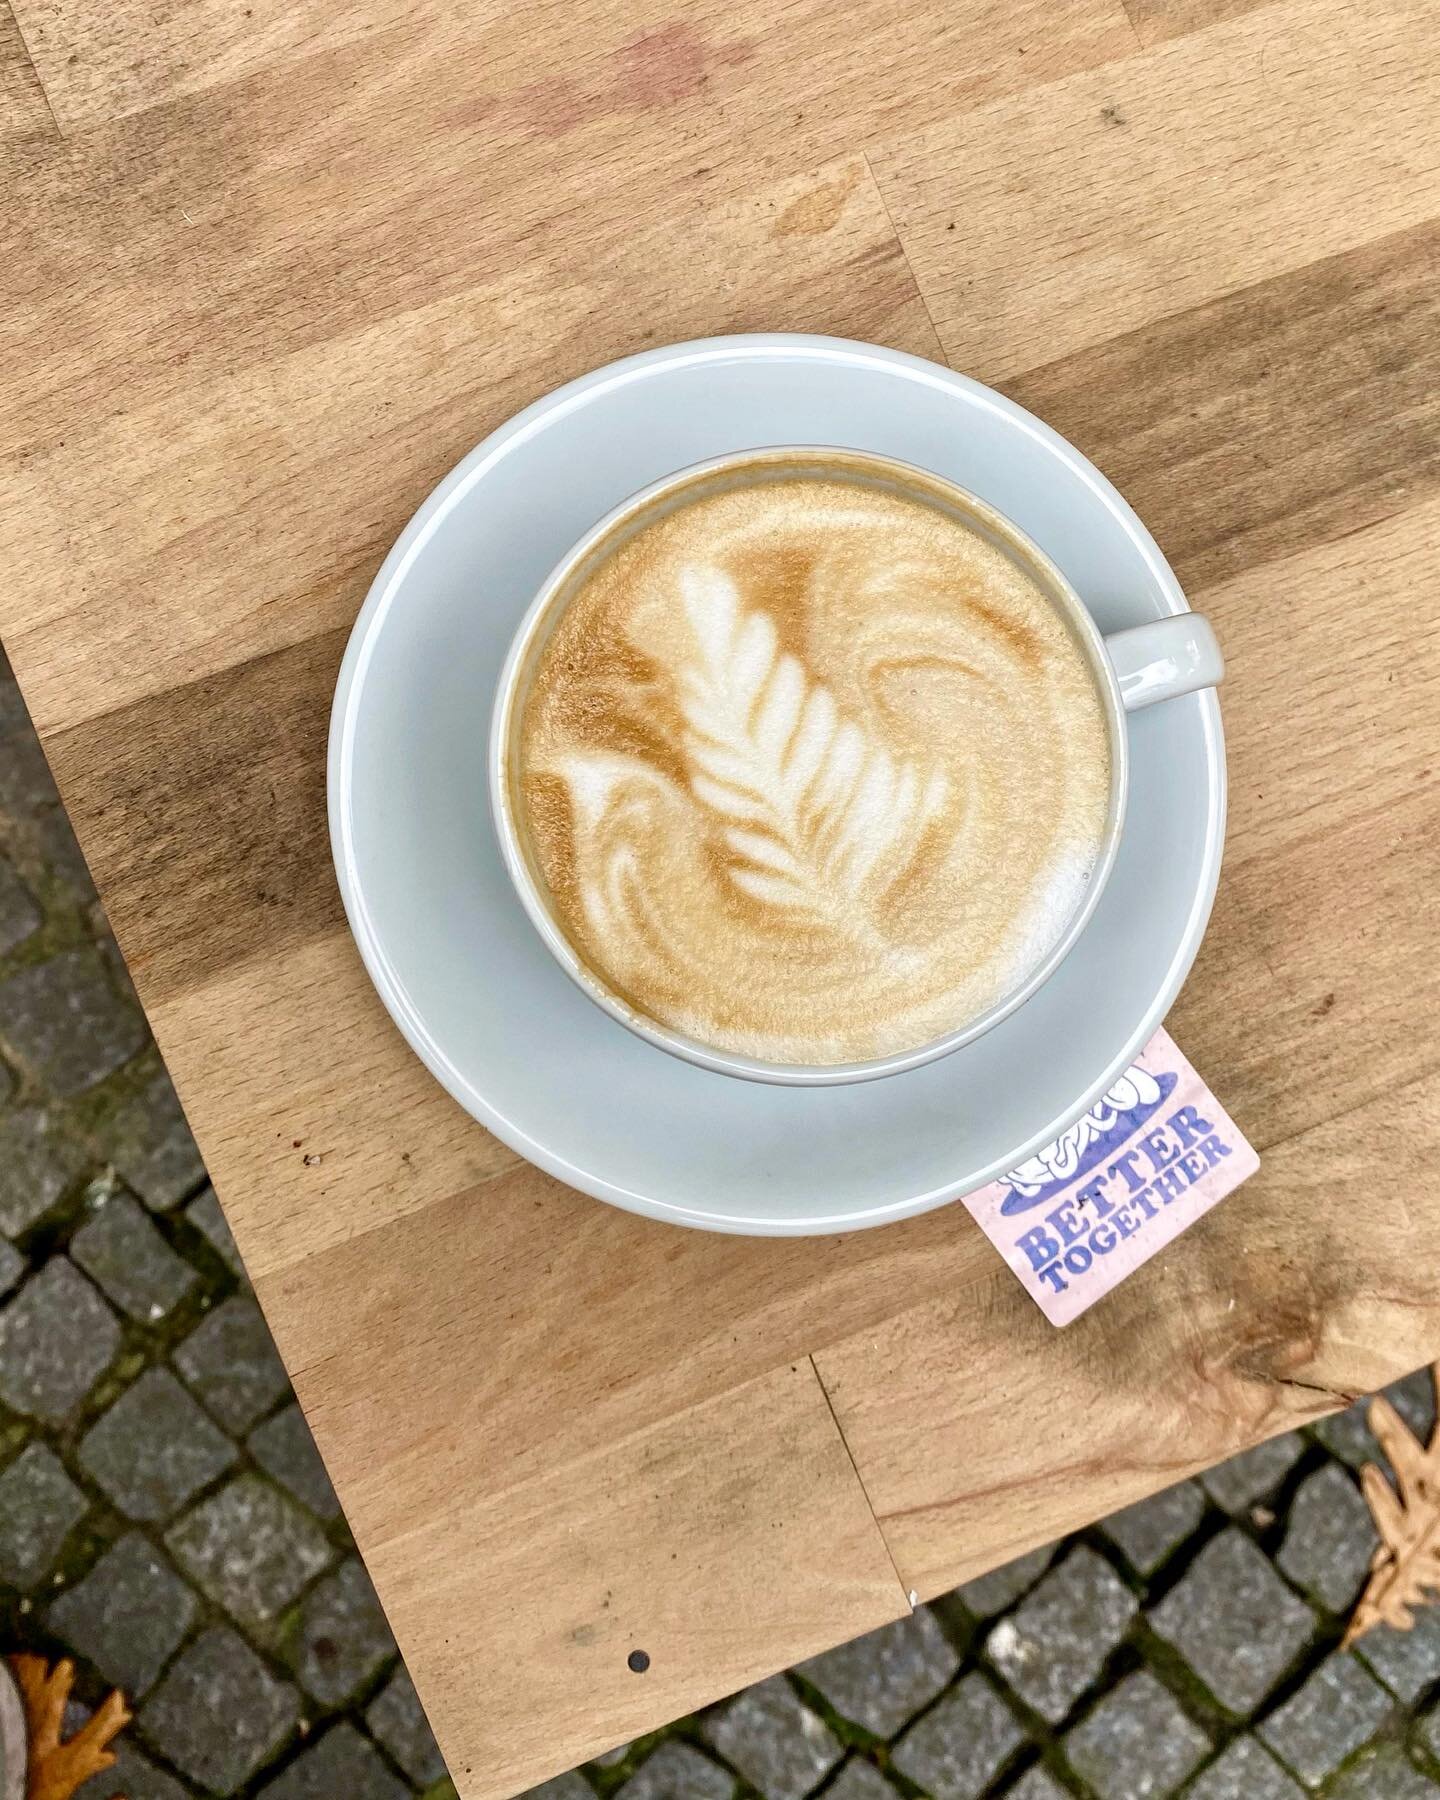 To late in the day for a caffeine fix? All our espresso based drinks are available in decaf 😴🤗
.
.
.
.
#decaf #decafcoffee #entkoffeiniert #espresso #bettertogether #best #berlincoffee #instadaily #instagood #foryoupage #decaffeinato